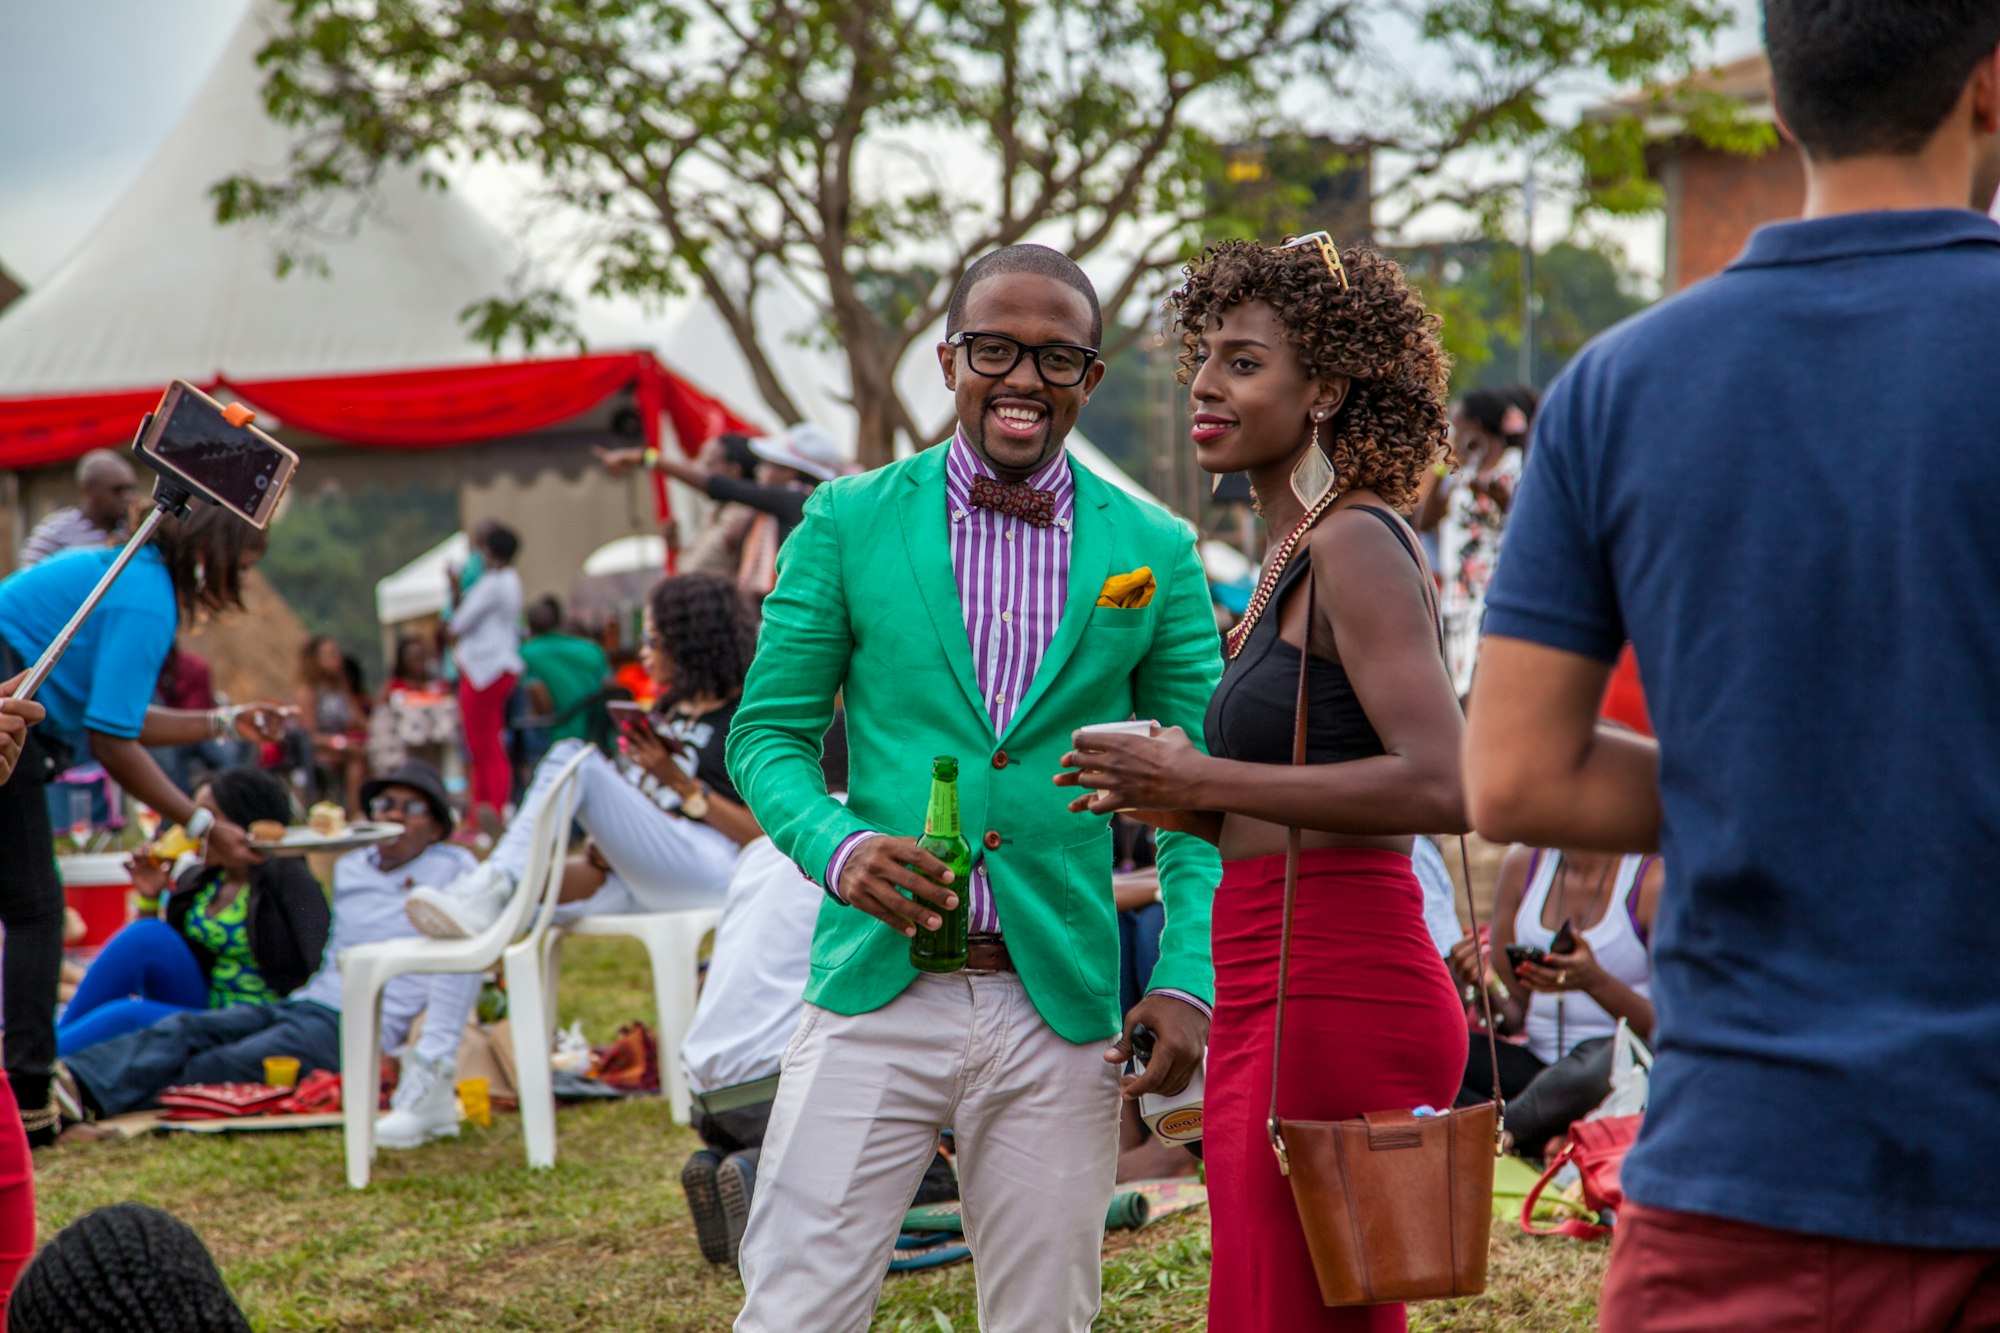 Posing for a shot at an event in Kampala, Uganda.